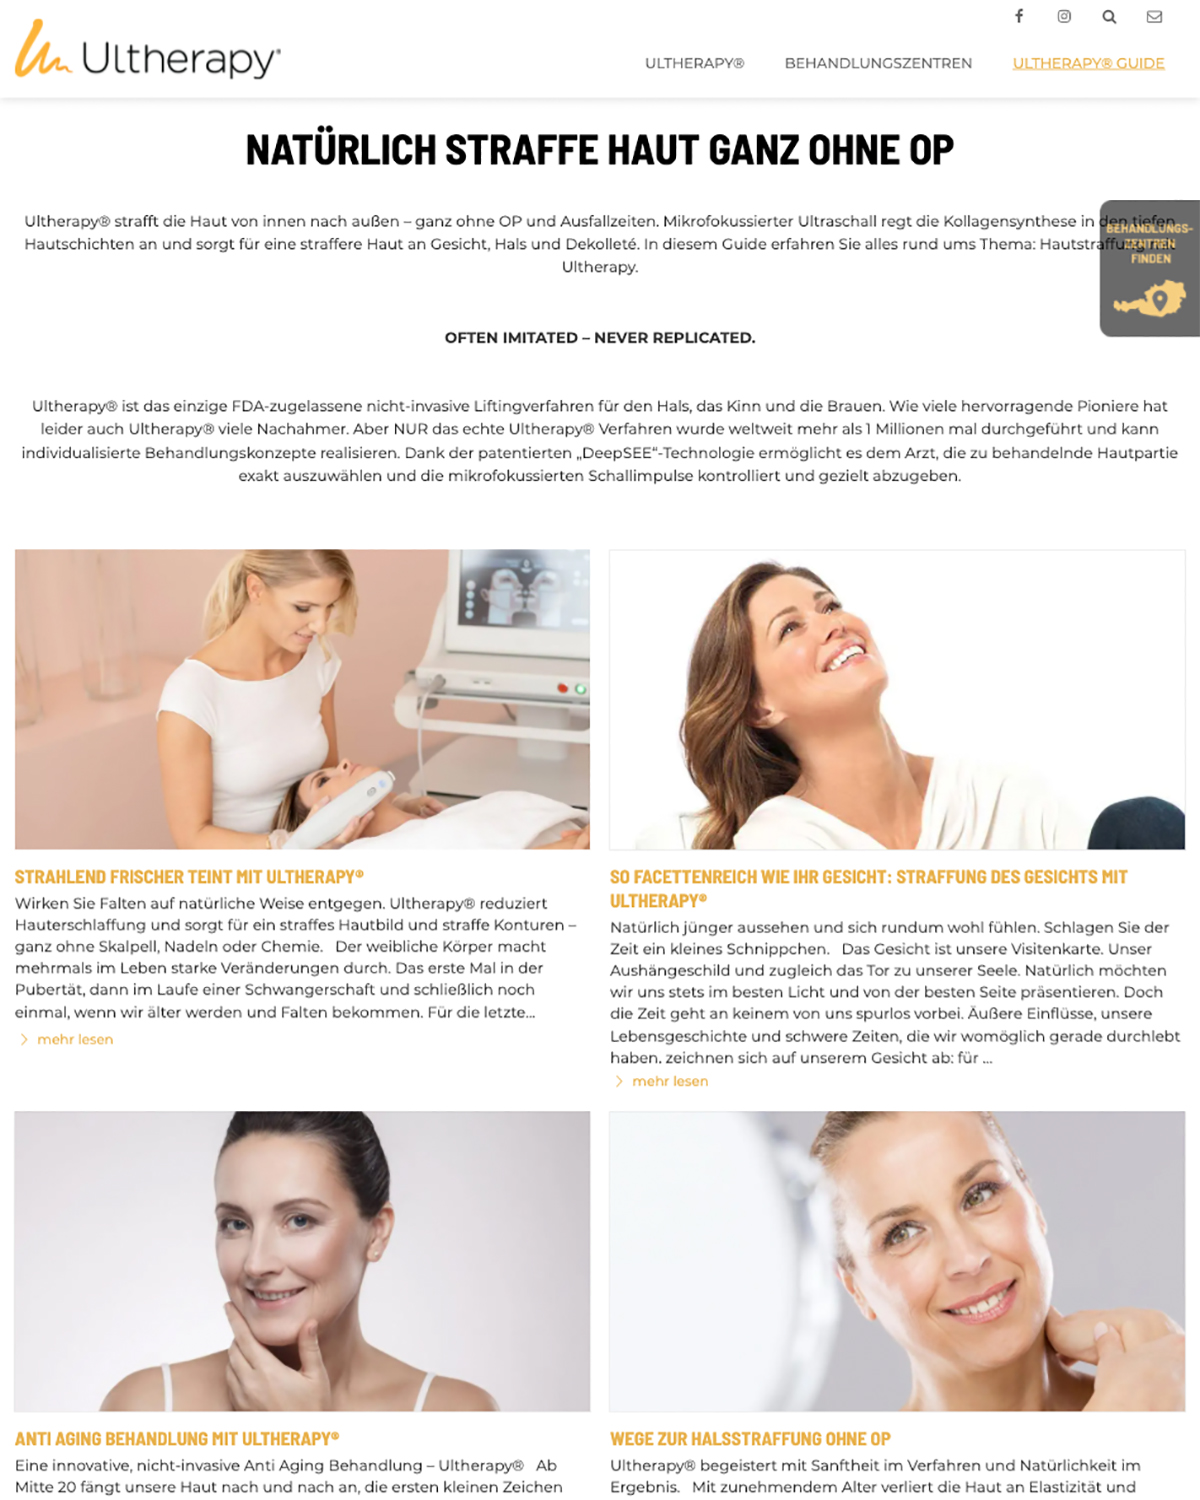 Ultherapy® Website - Seite "Ultherapy® Guide"